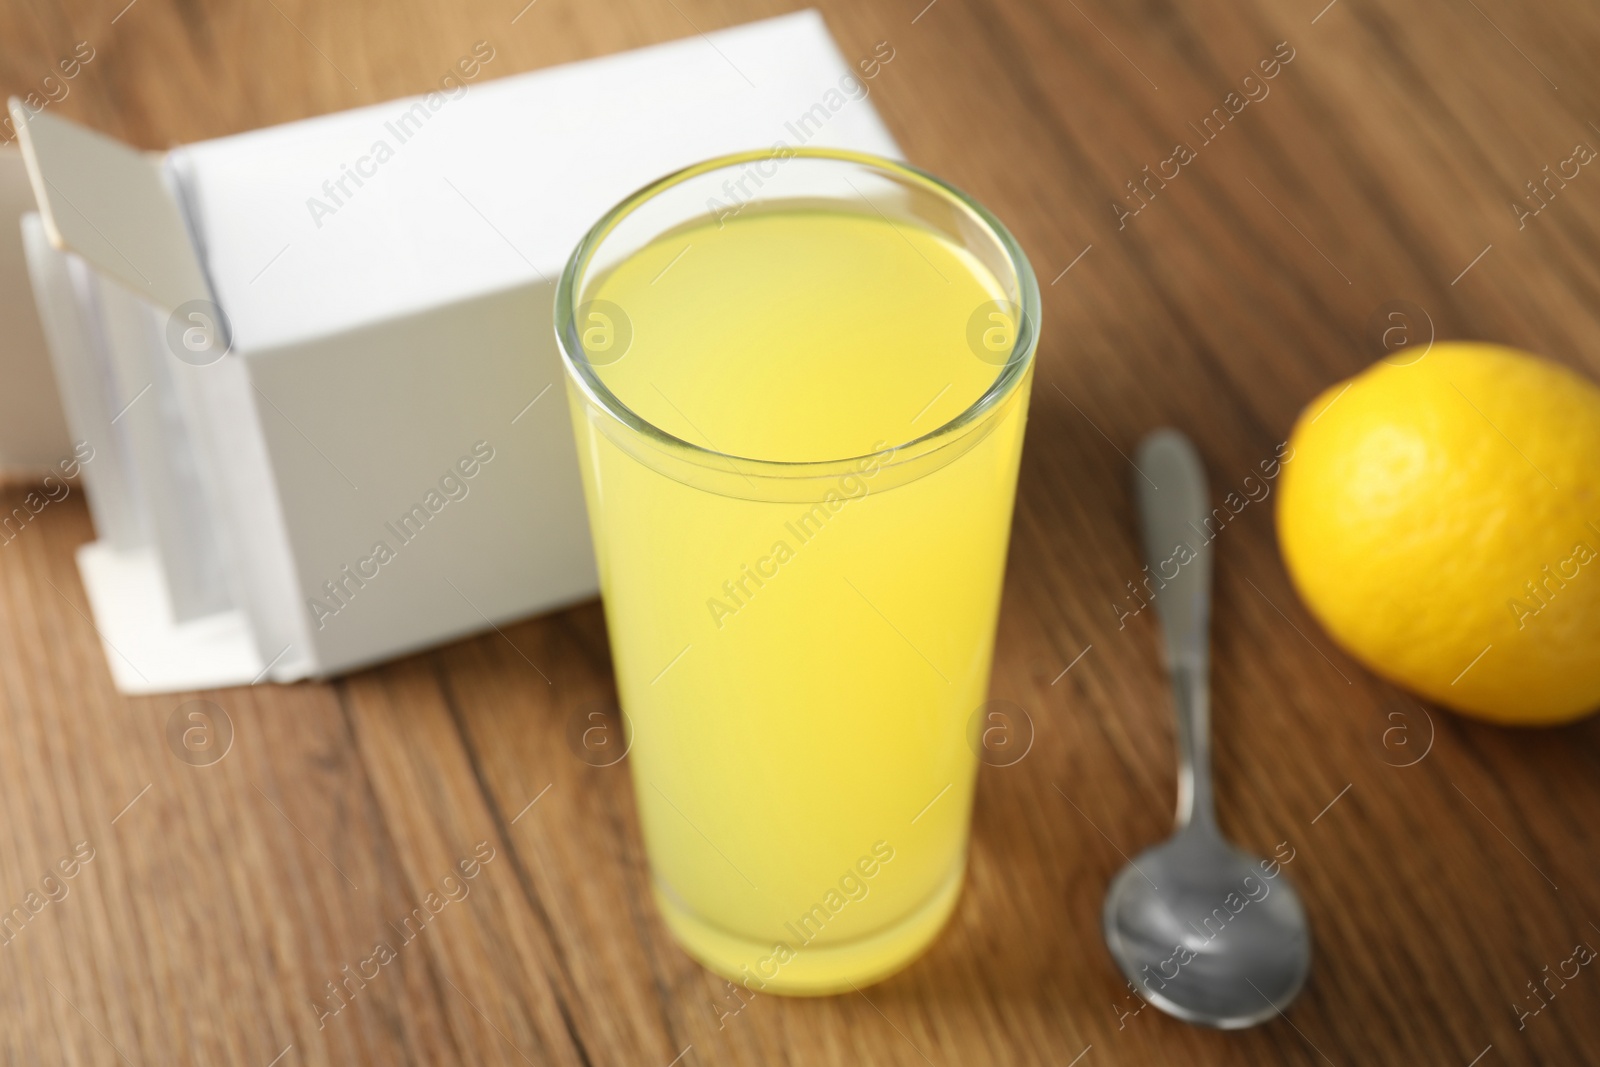 Photo of Glass with dissolved drug and box of medicine sachets on wooden table